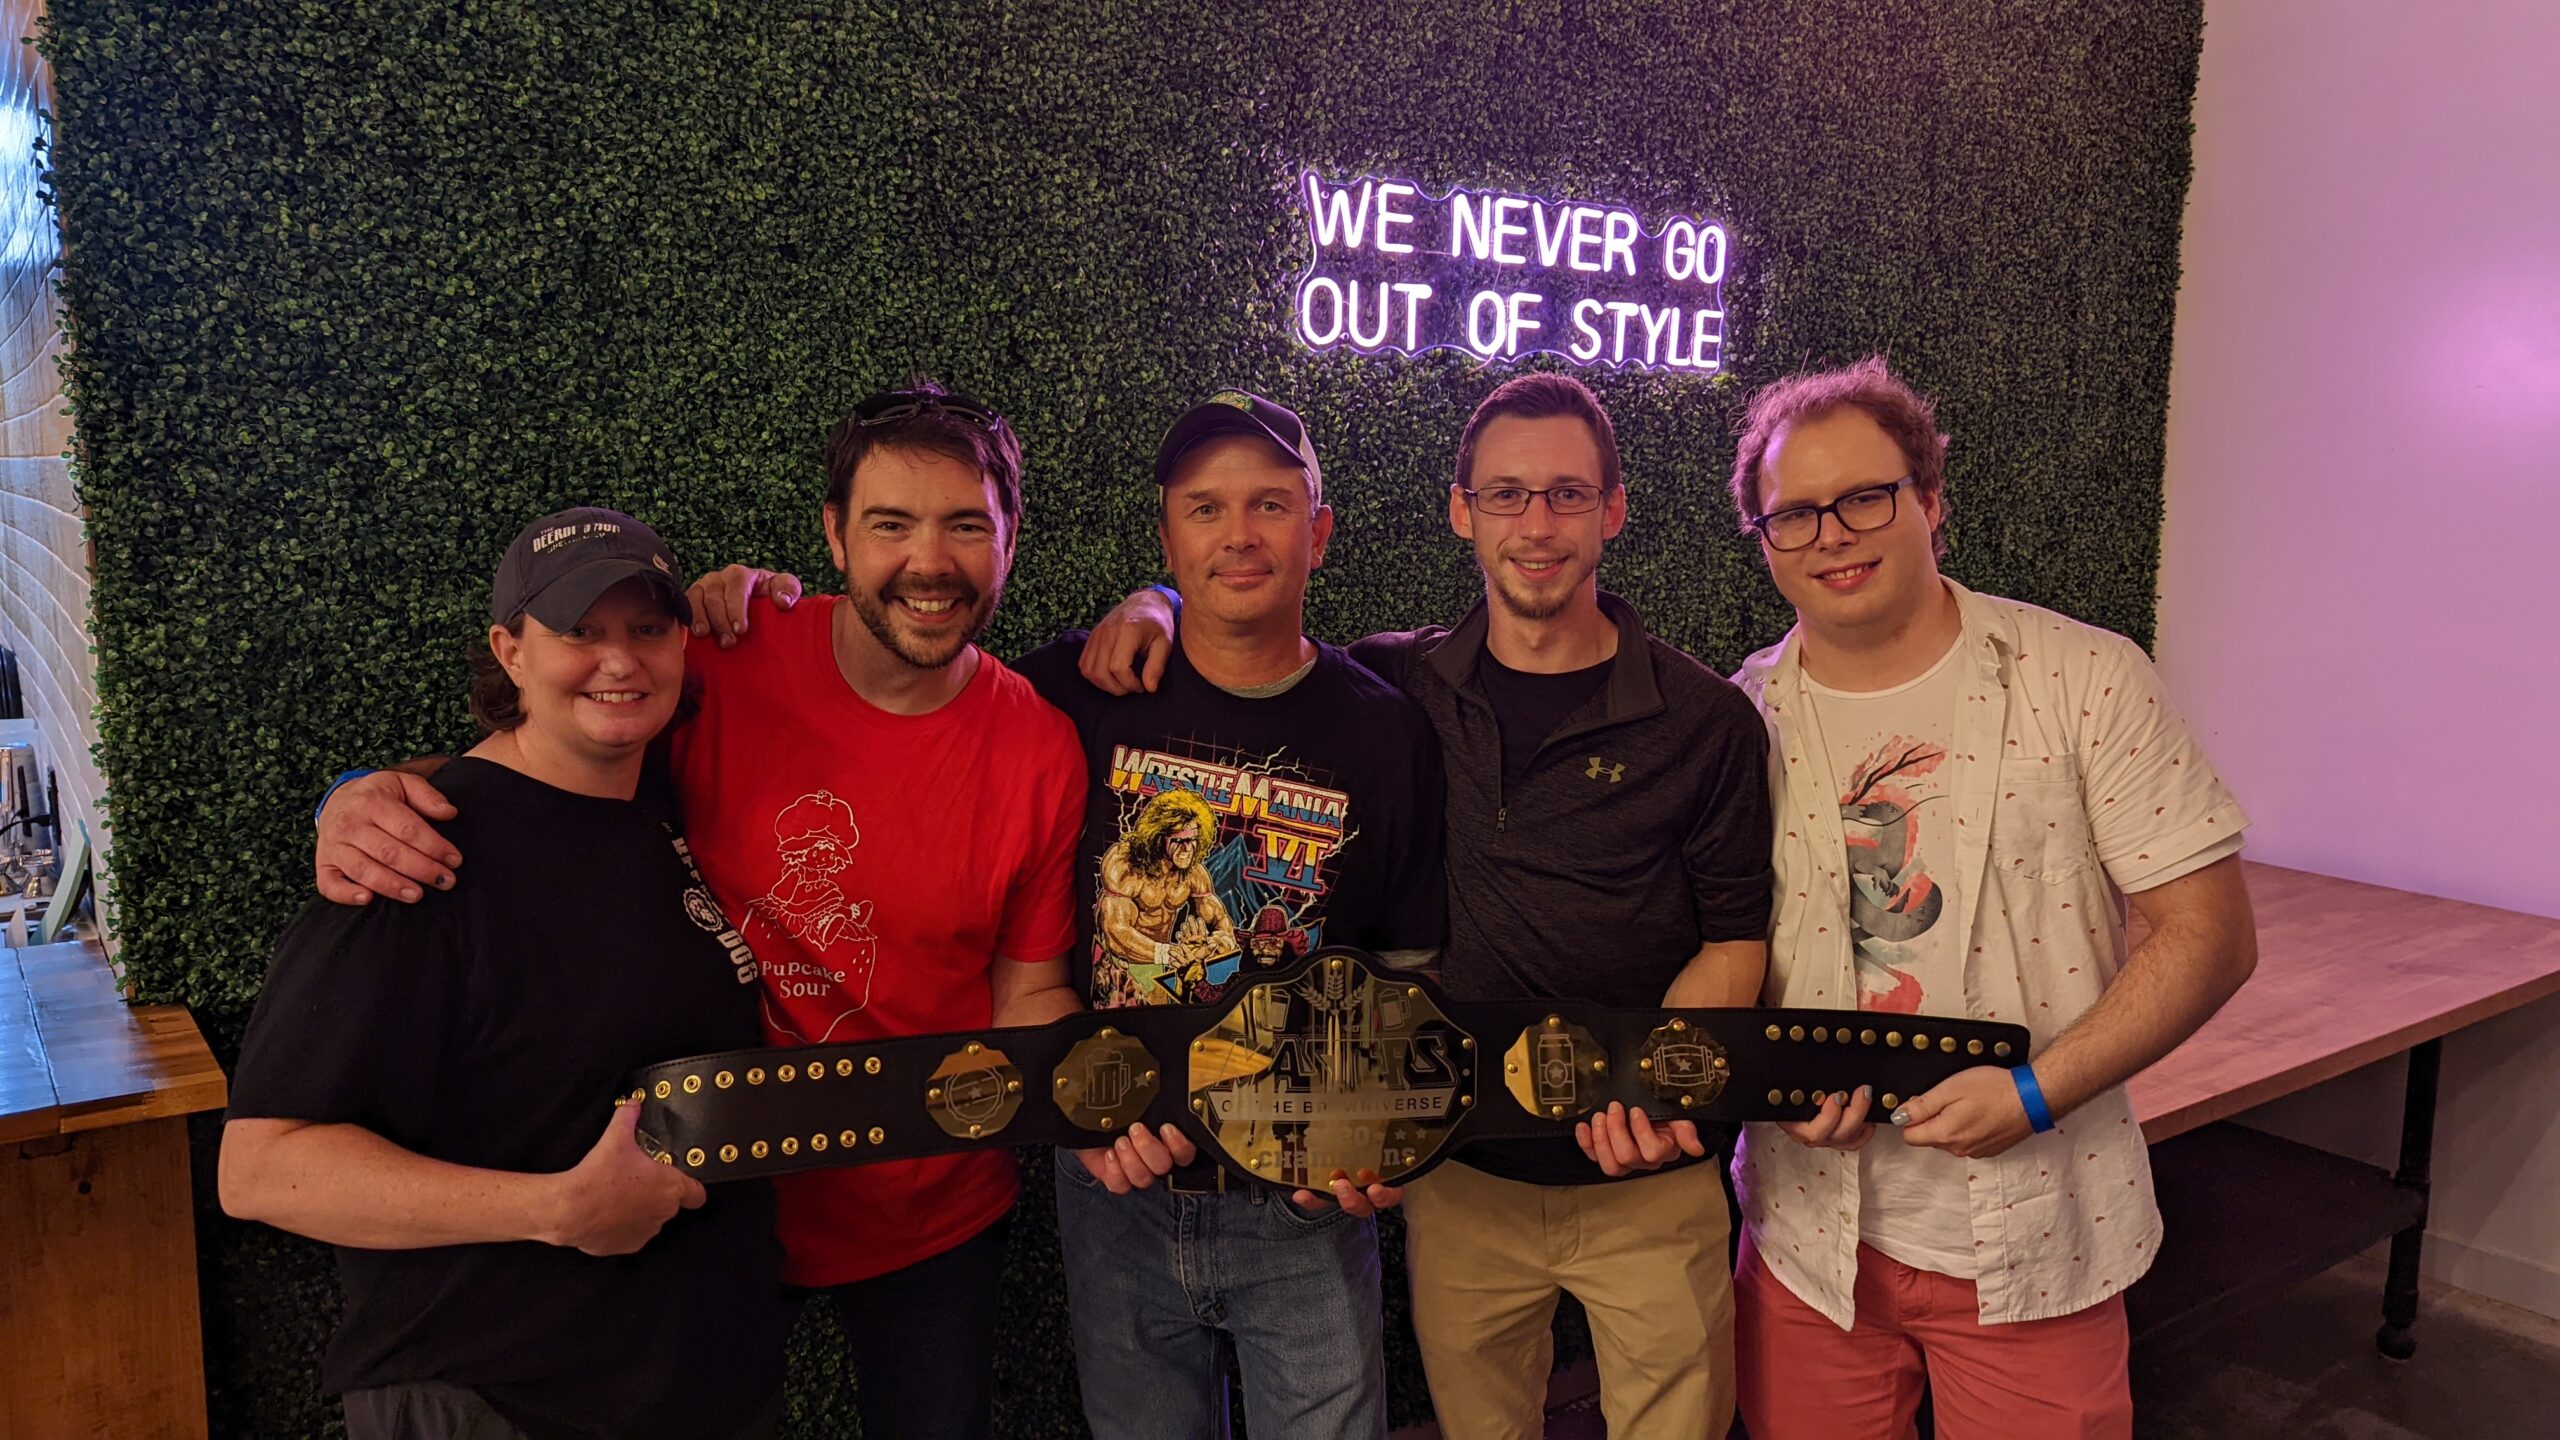 The winning crew of Jake's Brew Windsor and The Beerded Dog at the 2022 Masters of the Brewniverse in Windsor, Ontario.